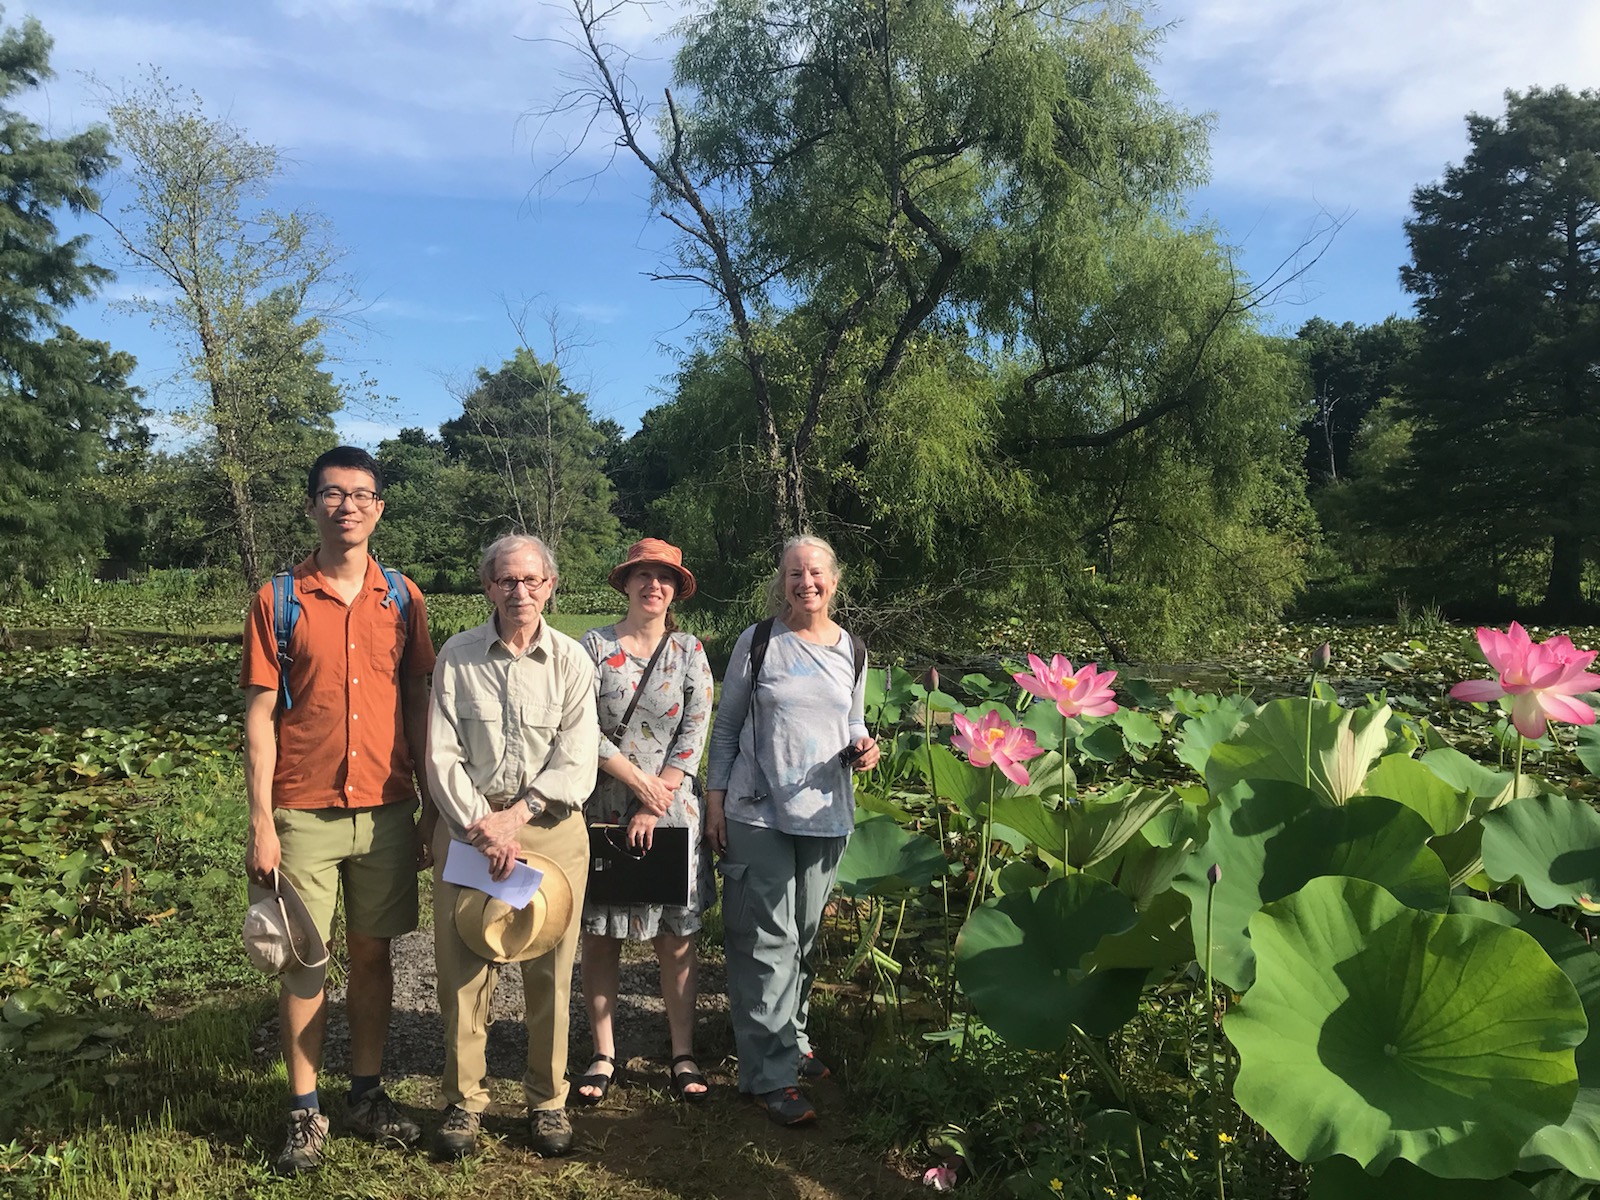 Towpath Members at the Lotus and Water Lily Festival